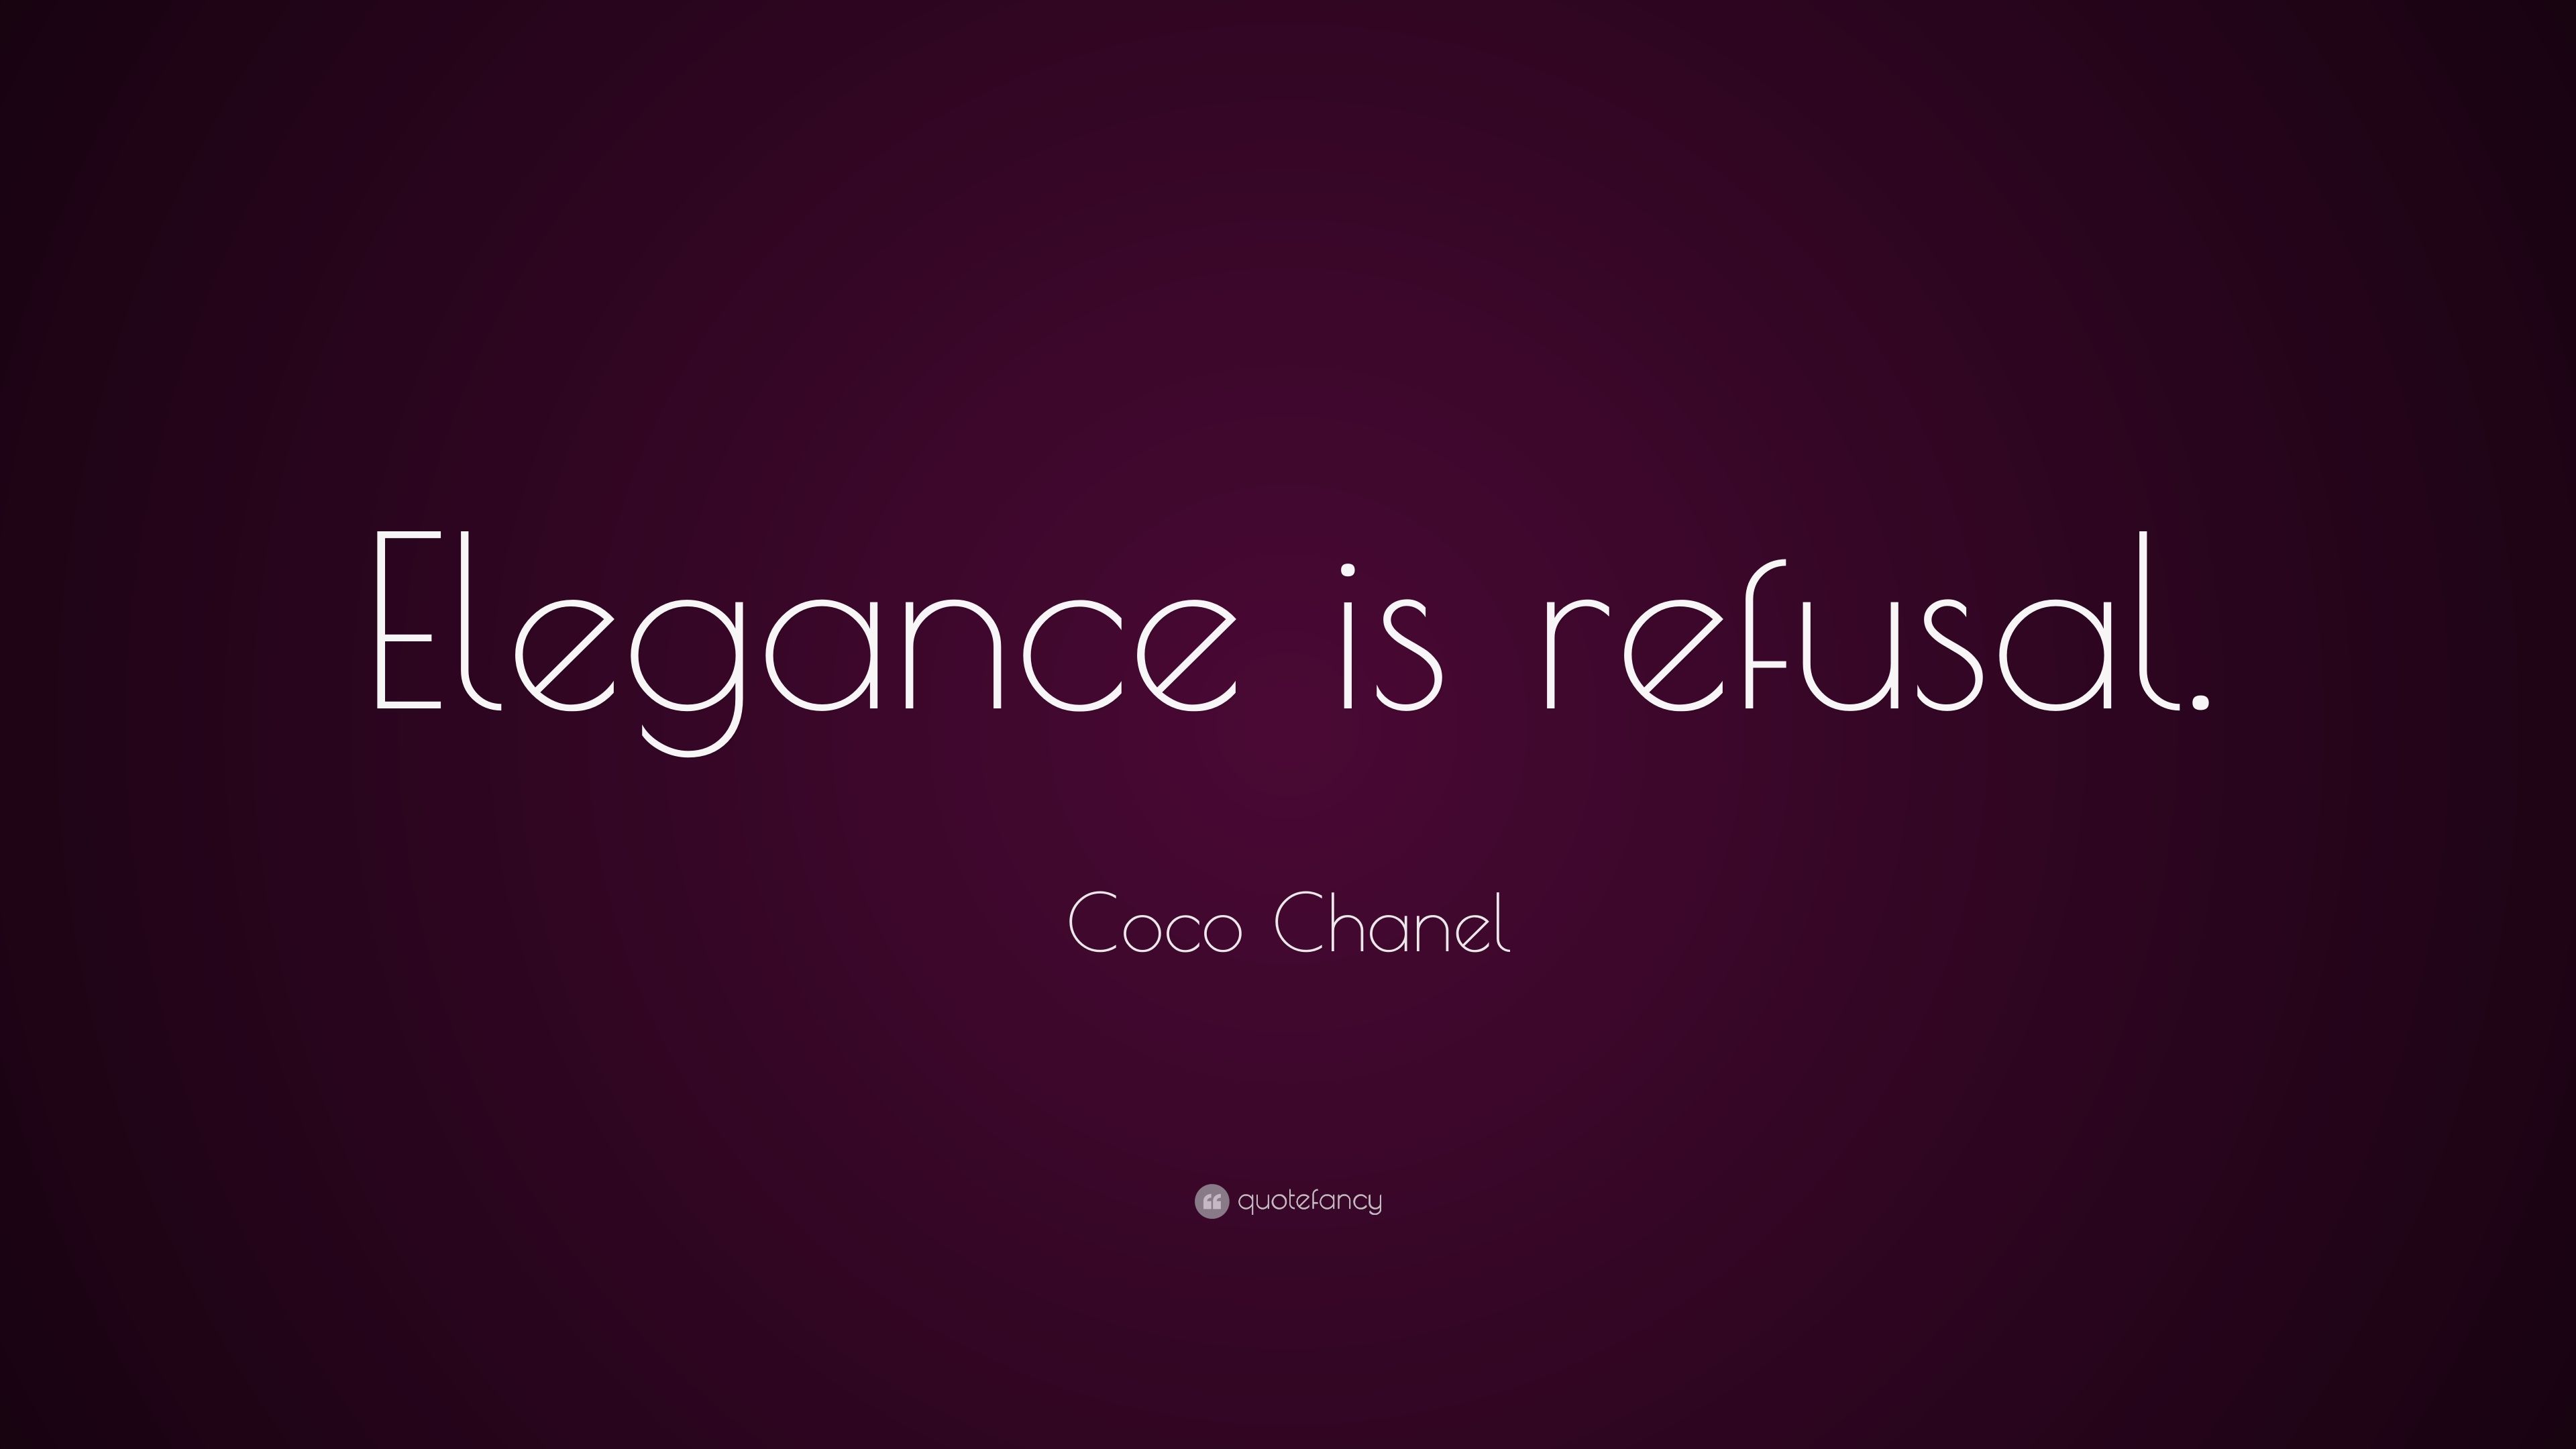 Coco Chanel Quote Elegance is refusal. 5 wallpapers - Quotefancy